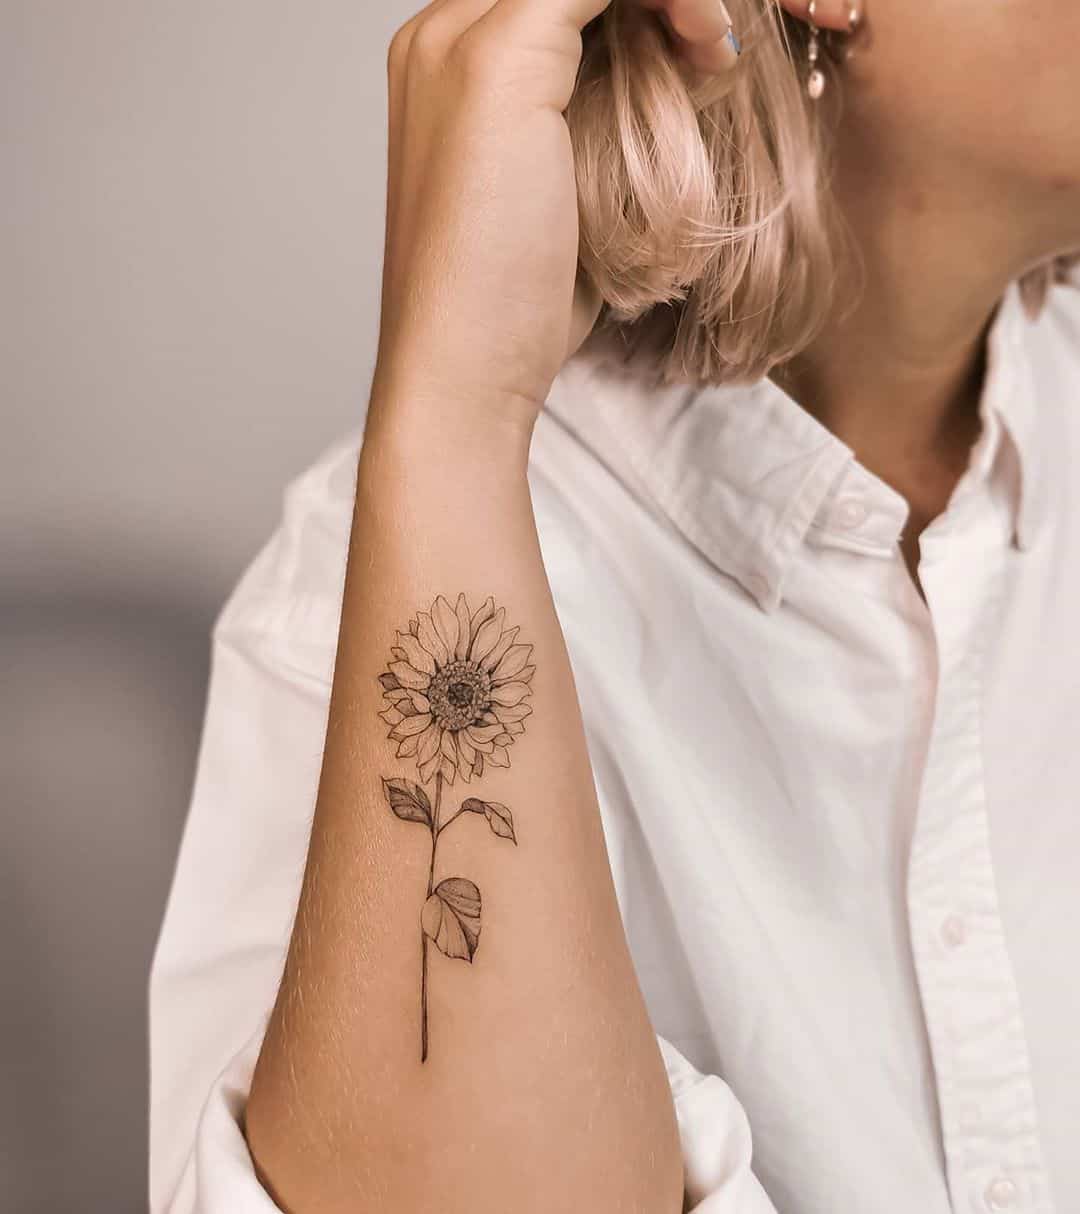 Sunflower Tattoos Meaning